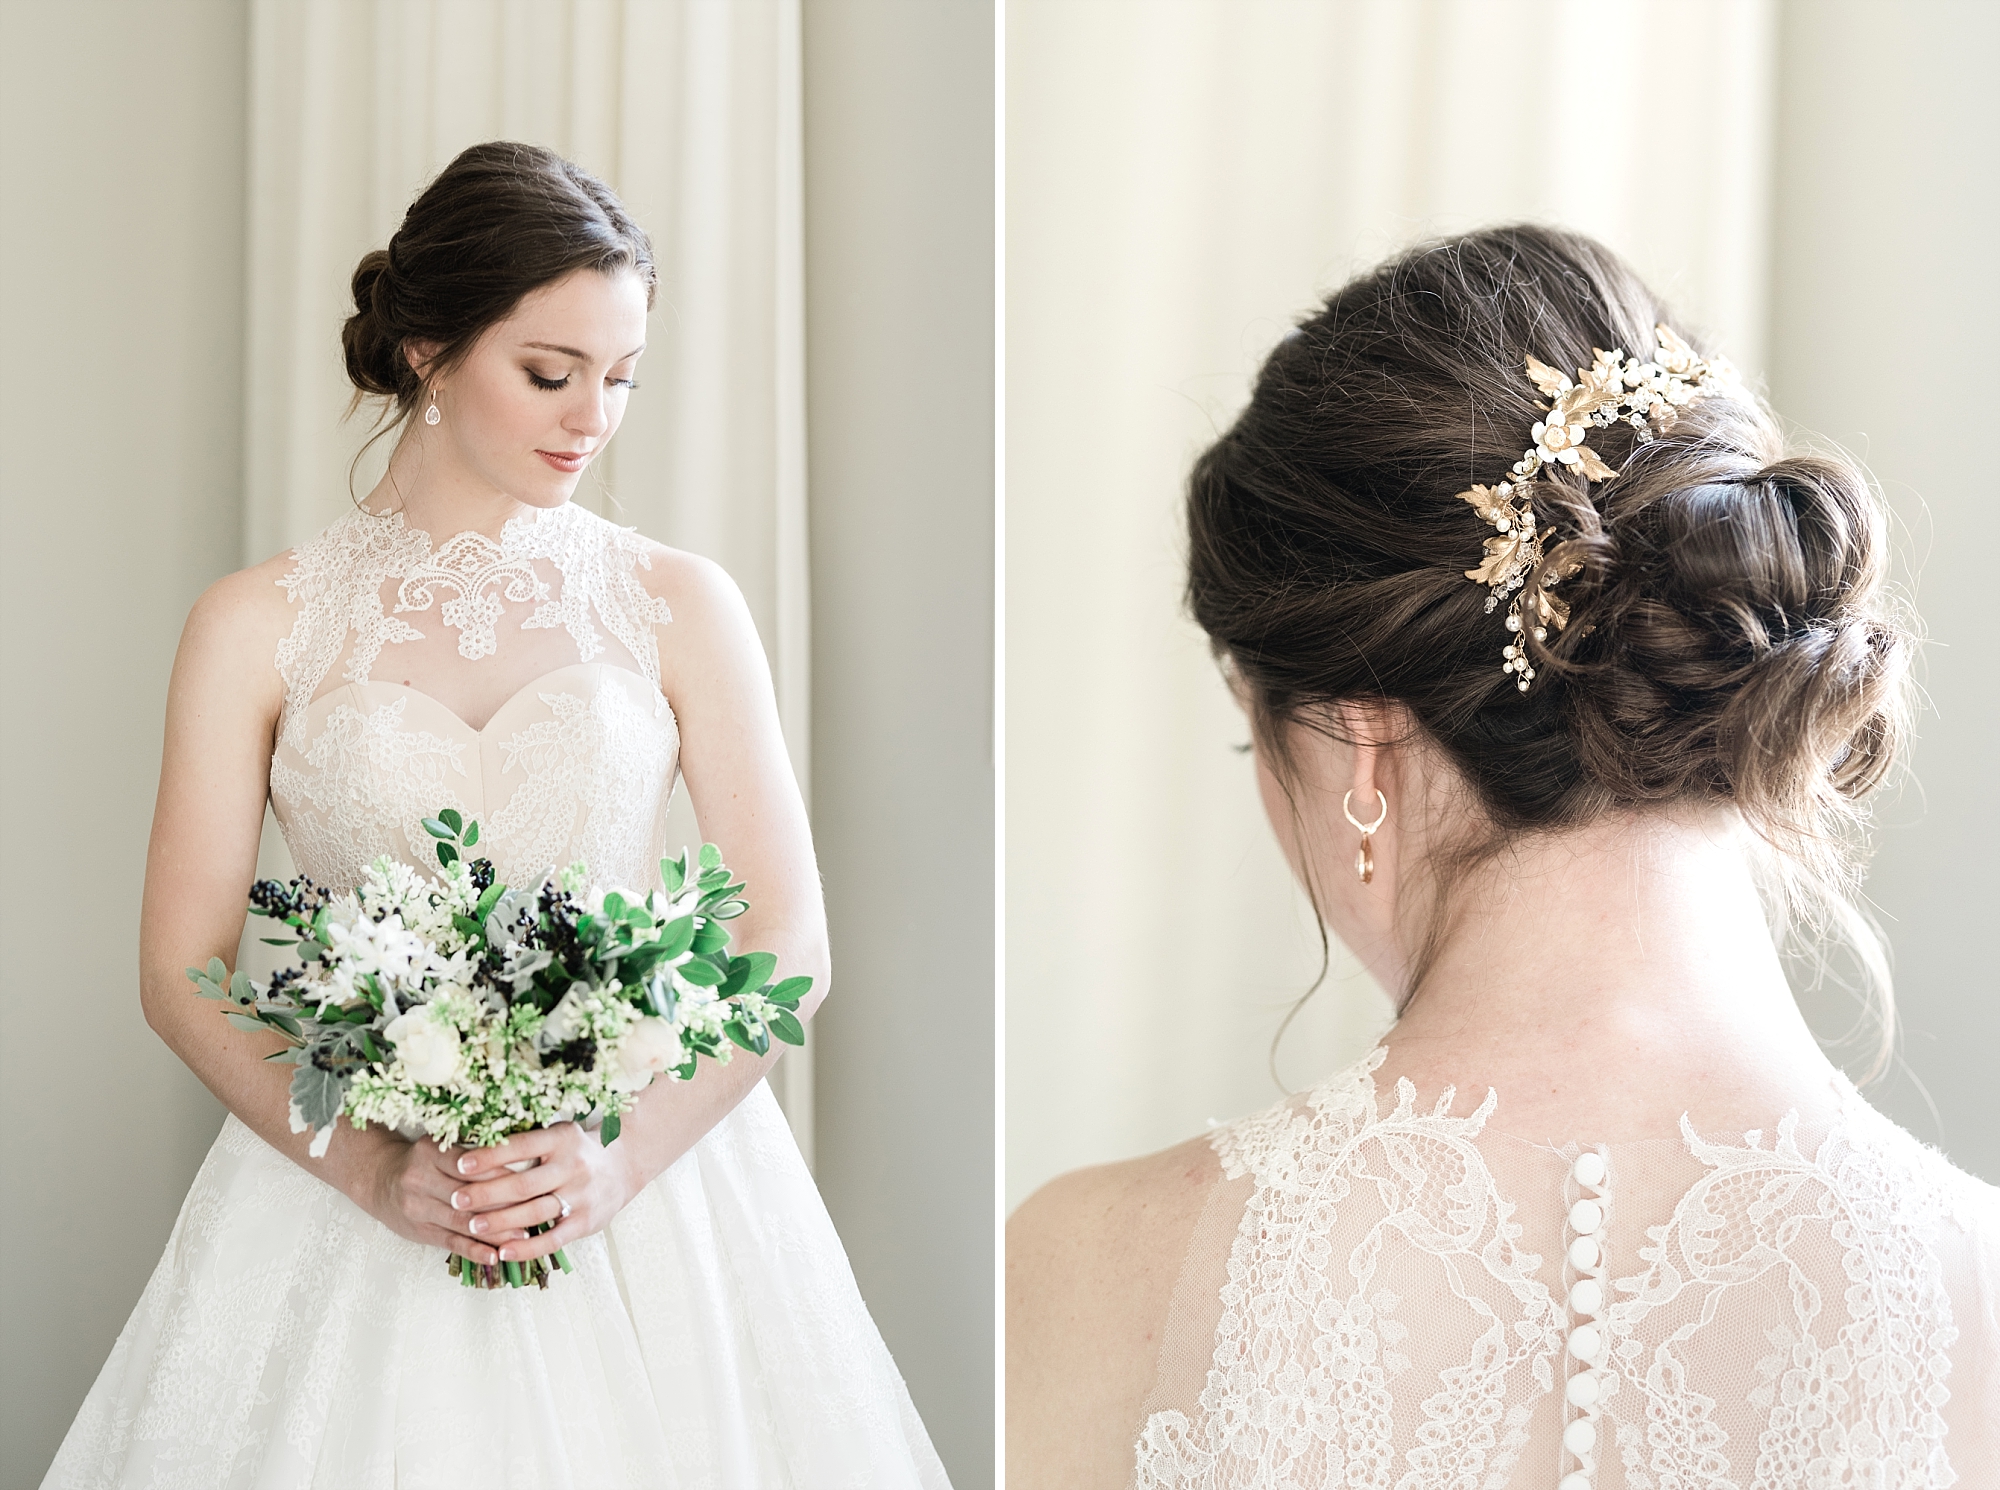 light airy bridal portrait with piano 